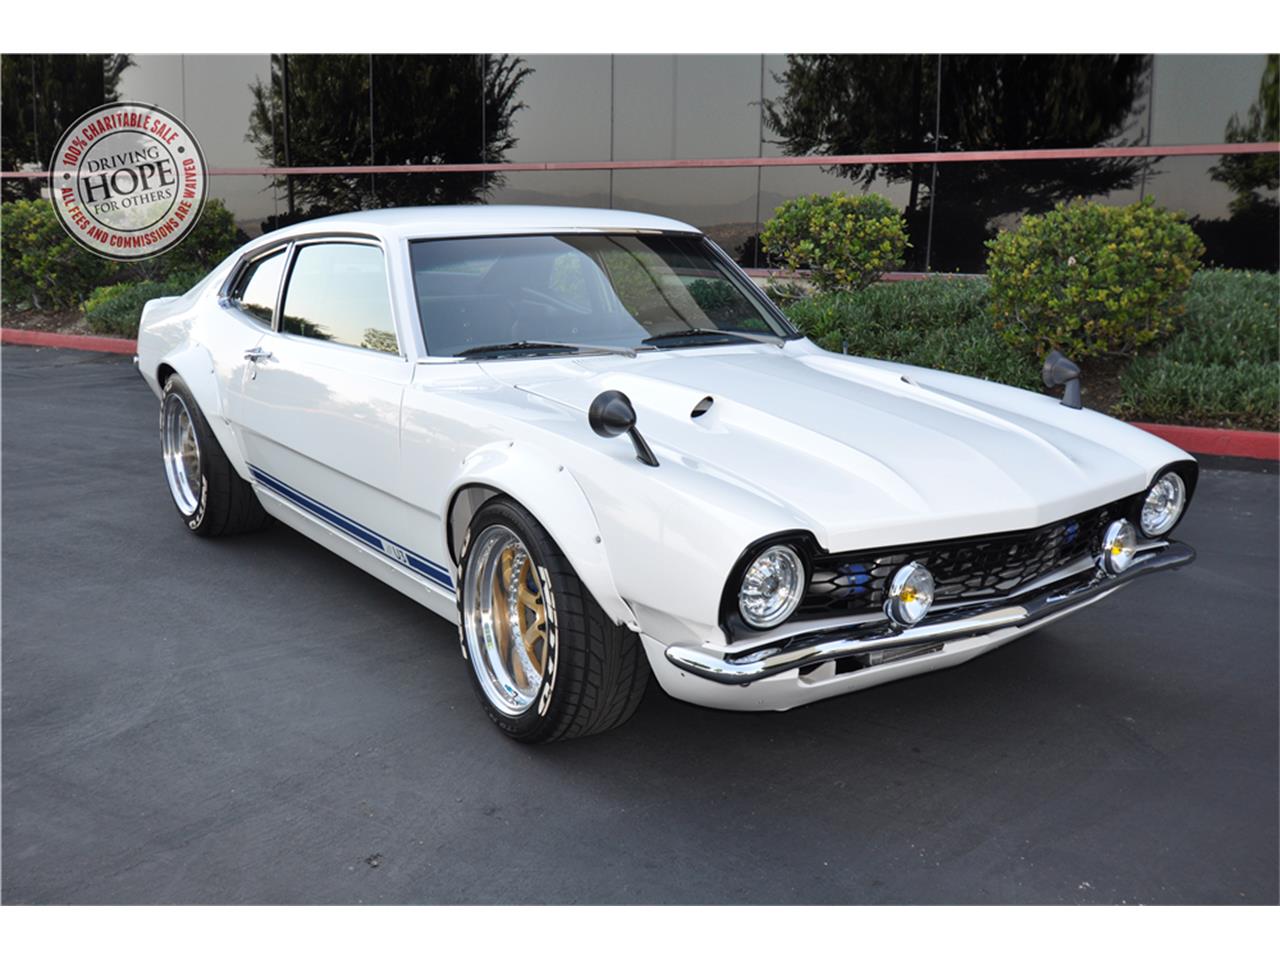 For Sale at Auction: 1972 Ford Maverick in Las Vegas, Nevada.